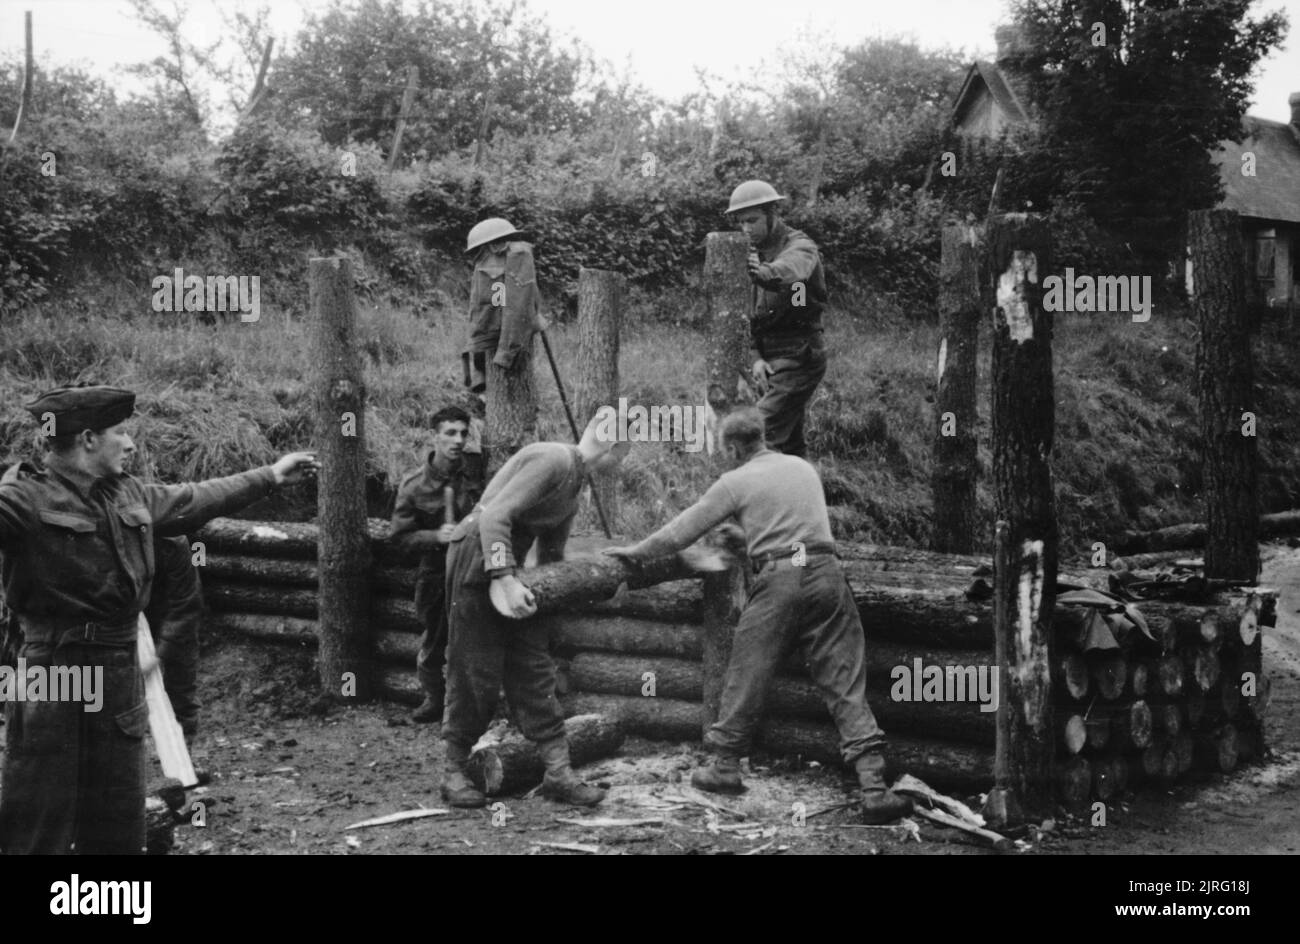 The British Expeditionary Force (bef) in France 1939-1940 British troops on the Somme Front: British troops erect an anti-tank barrier on the Amiens-Rouen road. Stock Photo